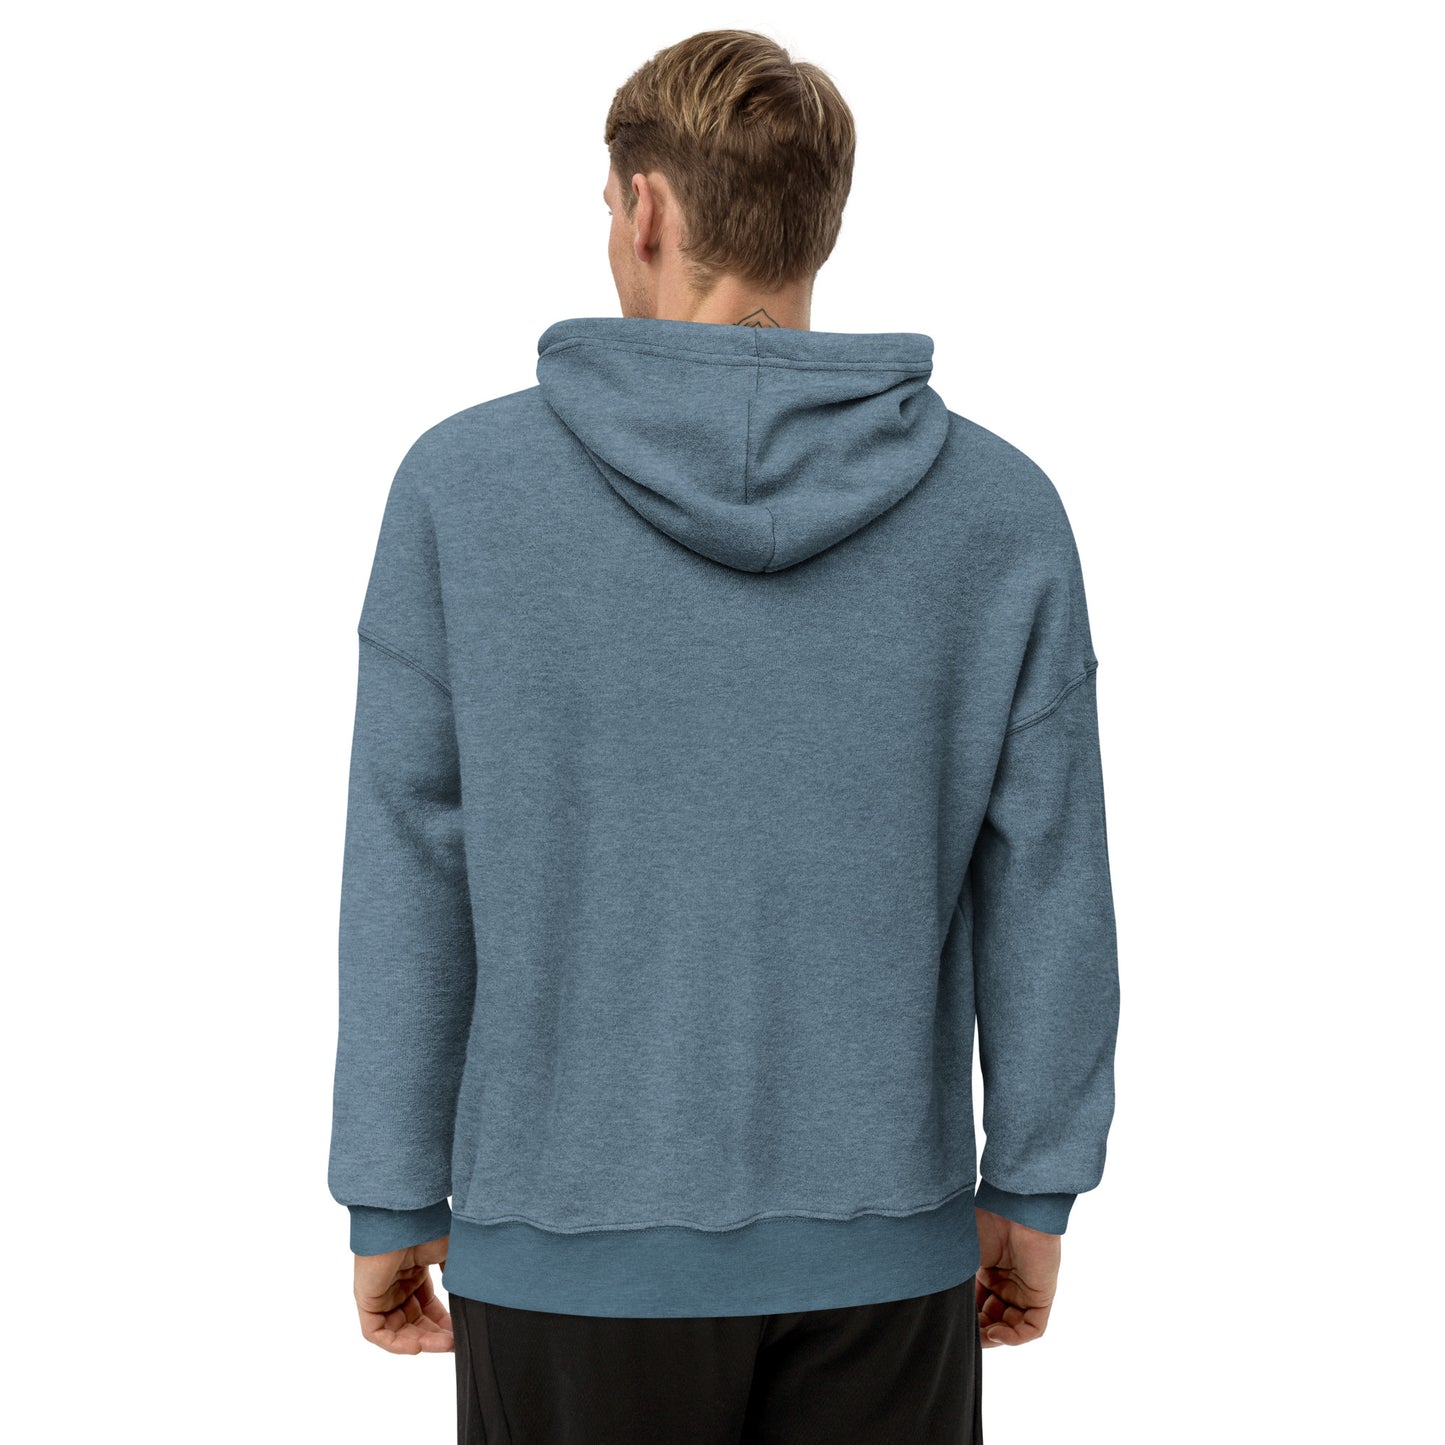 District Tuition Unisex sueded fleece hoodie